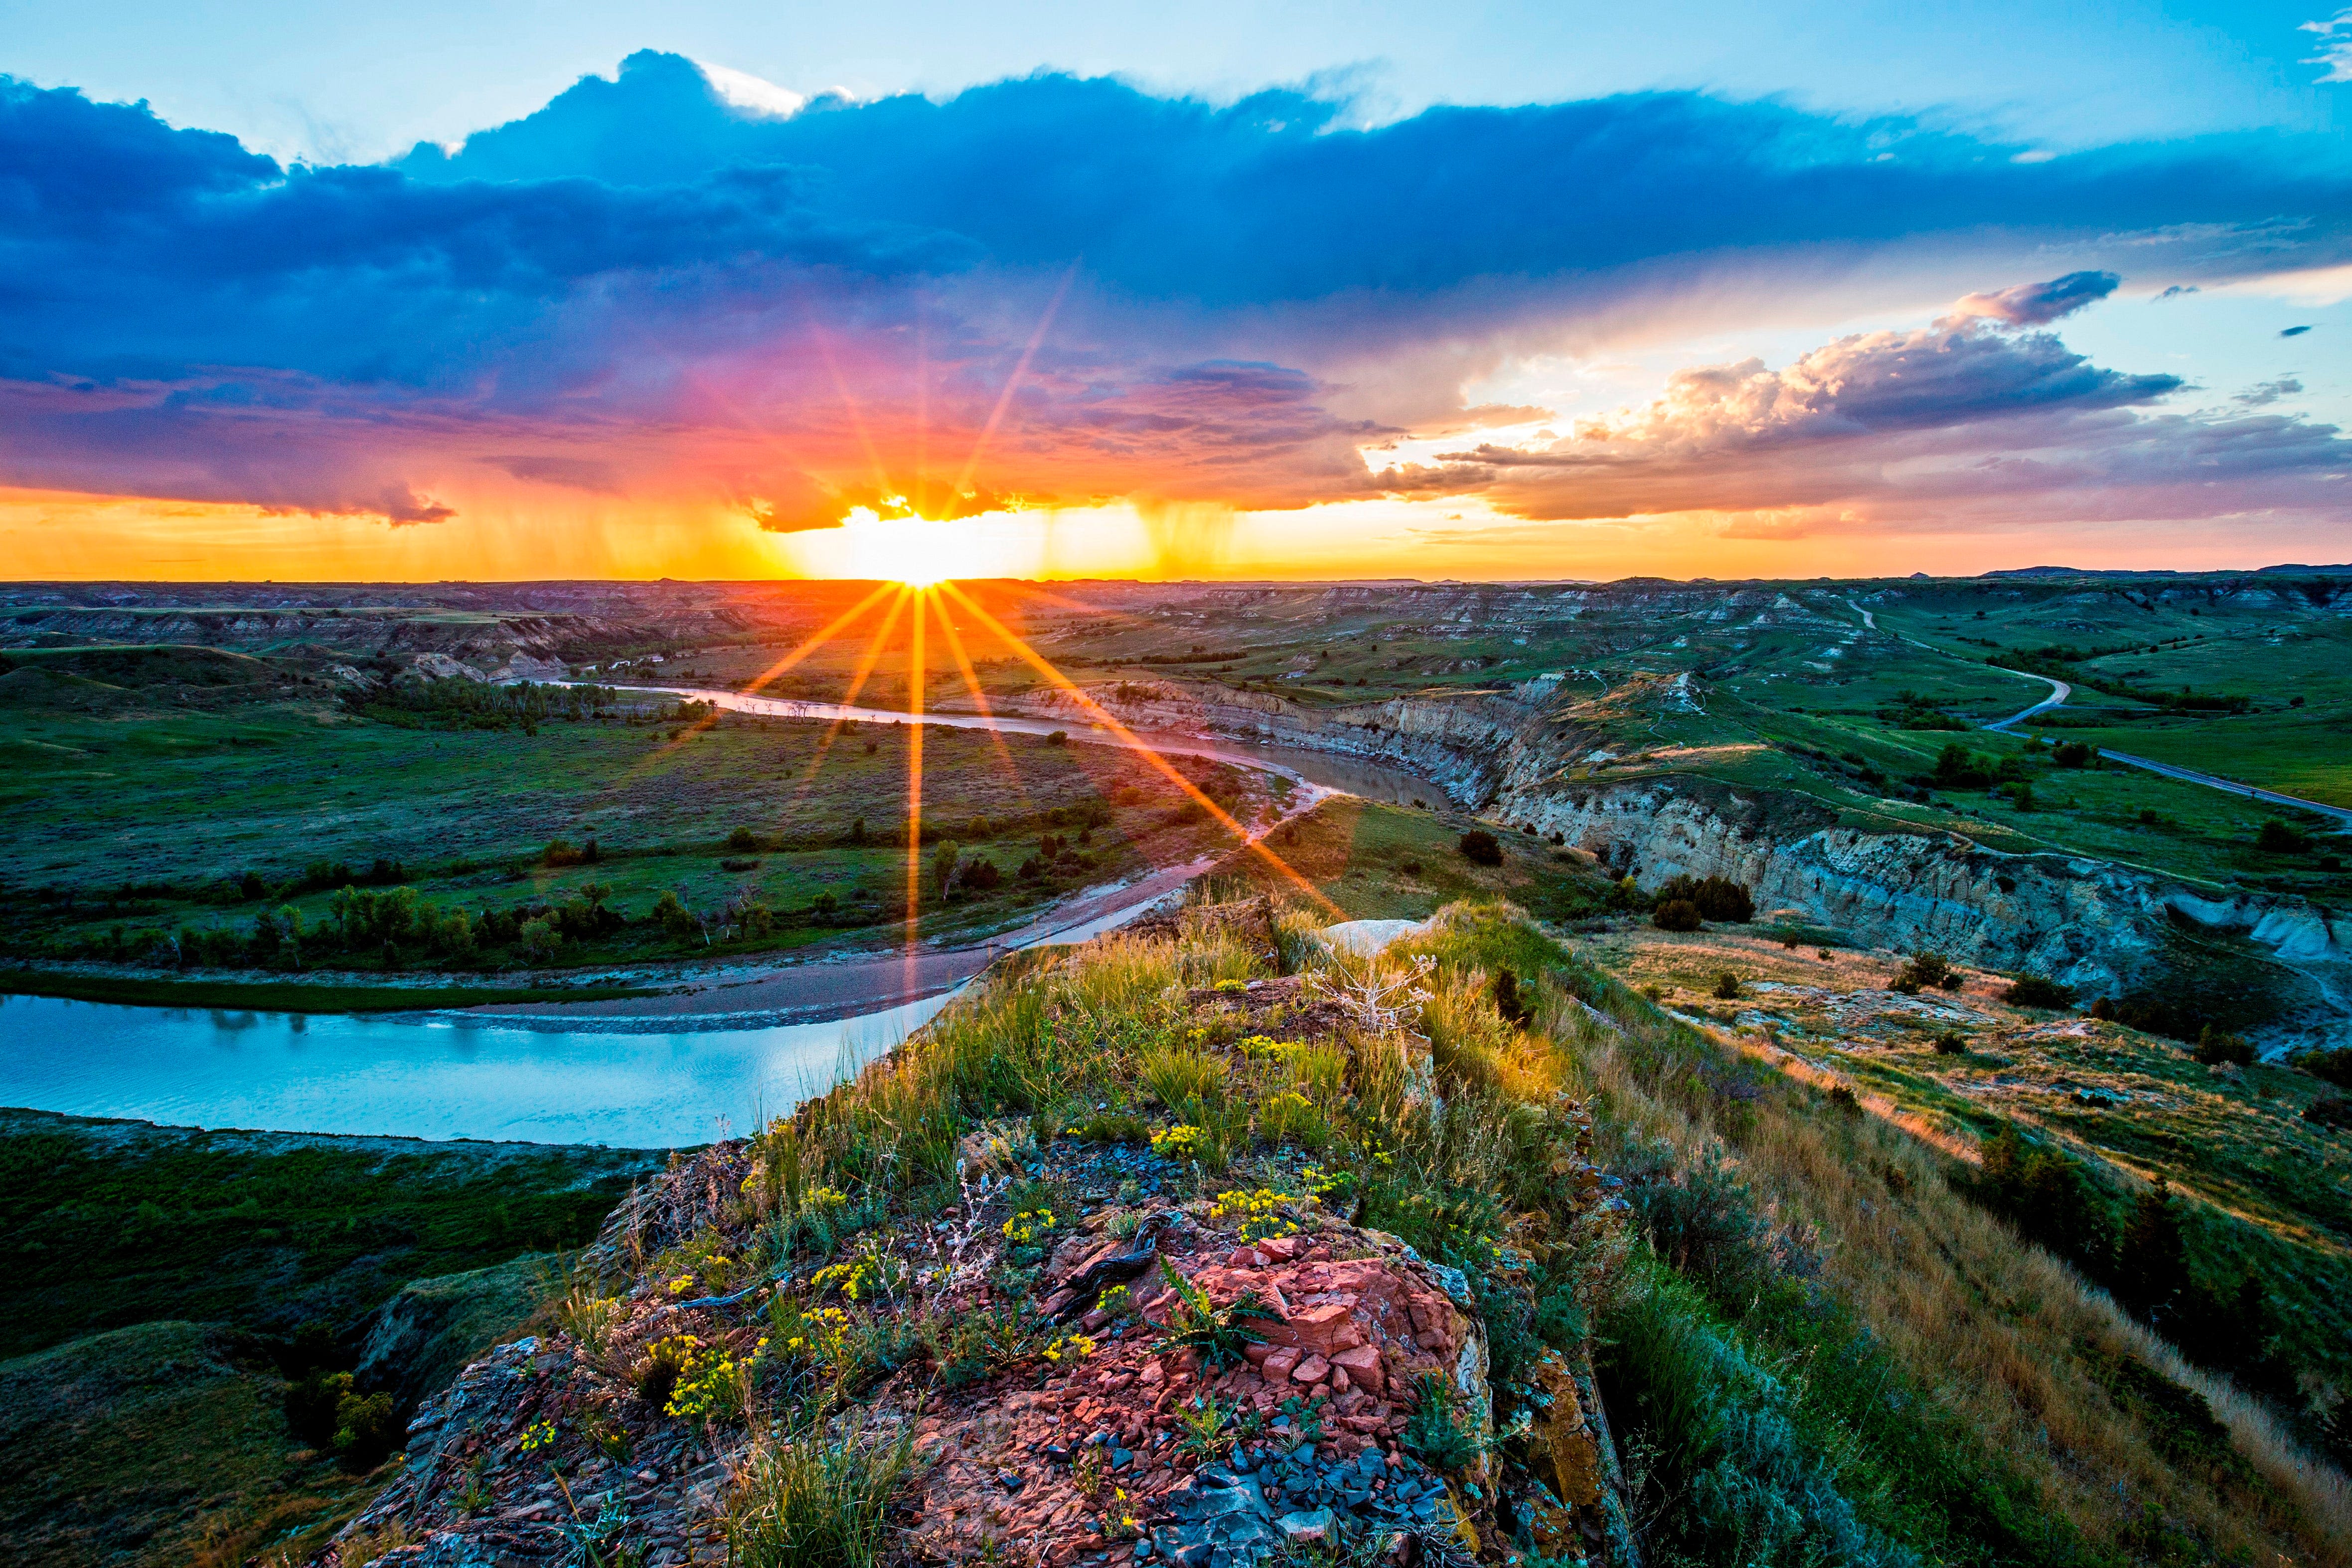 An unexpected gem: What travelers will find at Theodore Roosevelt National Park